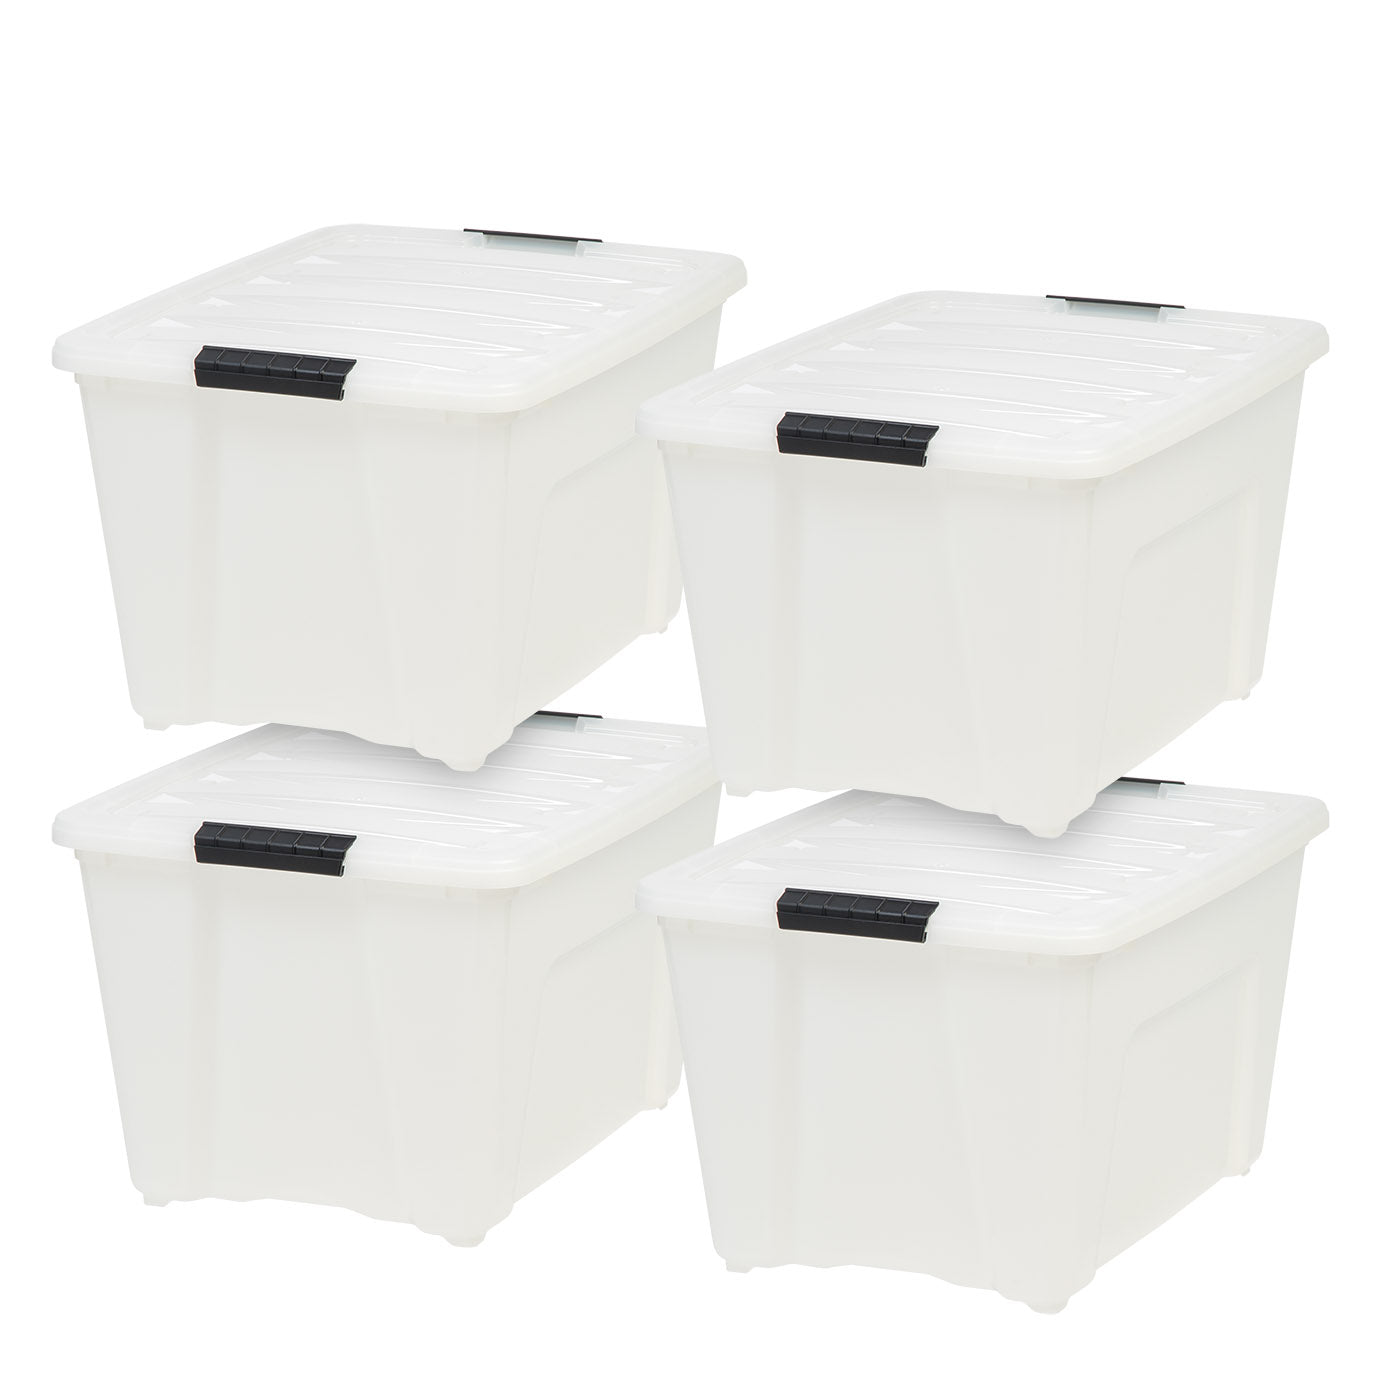 Iris USA 32 qt. Plastic Storage Bin Tote Organizing Container with Durable Lid and Secure Latching Buckles, Stackable and Nestable, 4 Pack, Black with